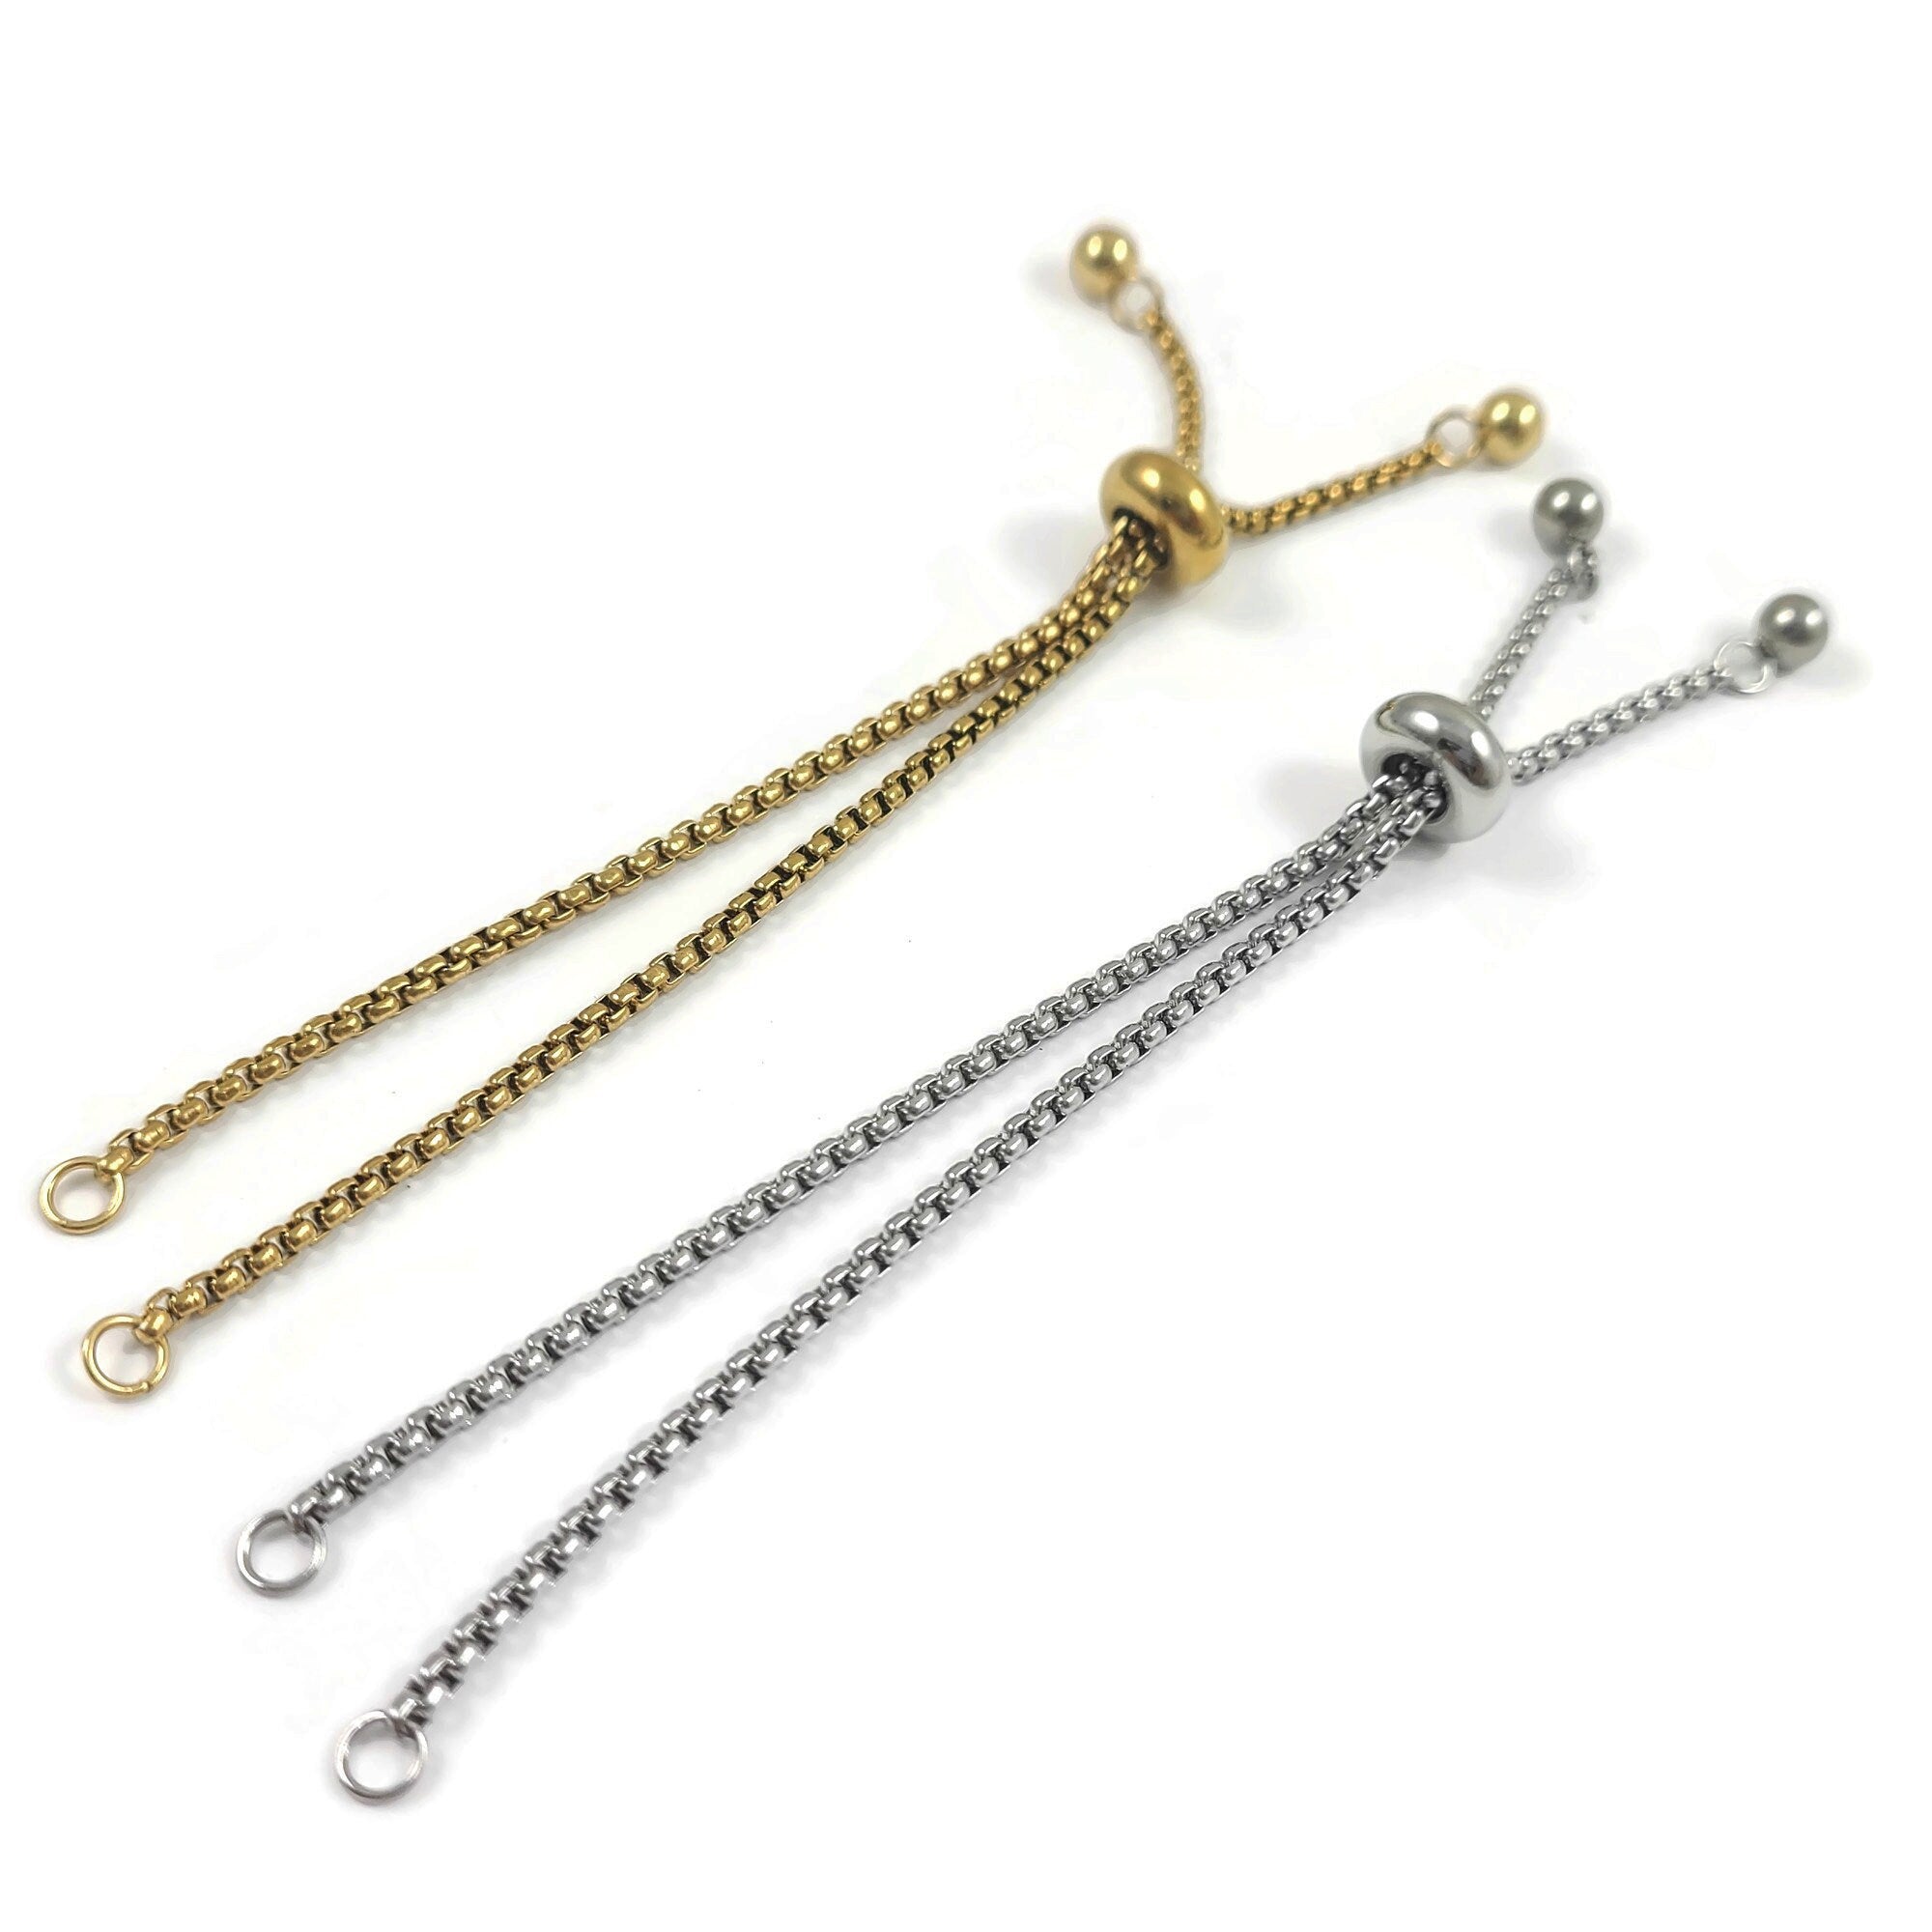 12X Stainless Steel Gold/Silver Necklace Bracelet Extender Chain Extenders  Hot